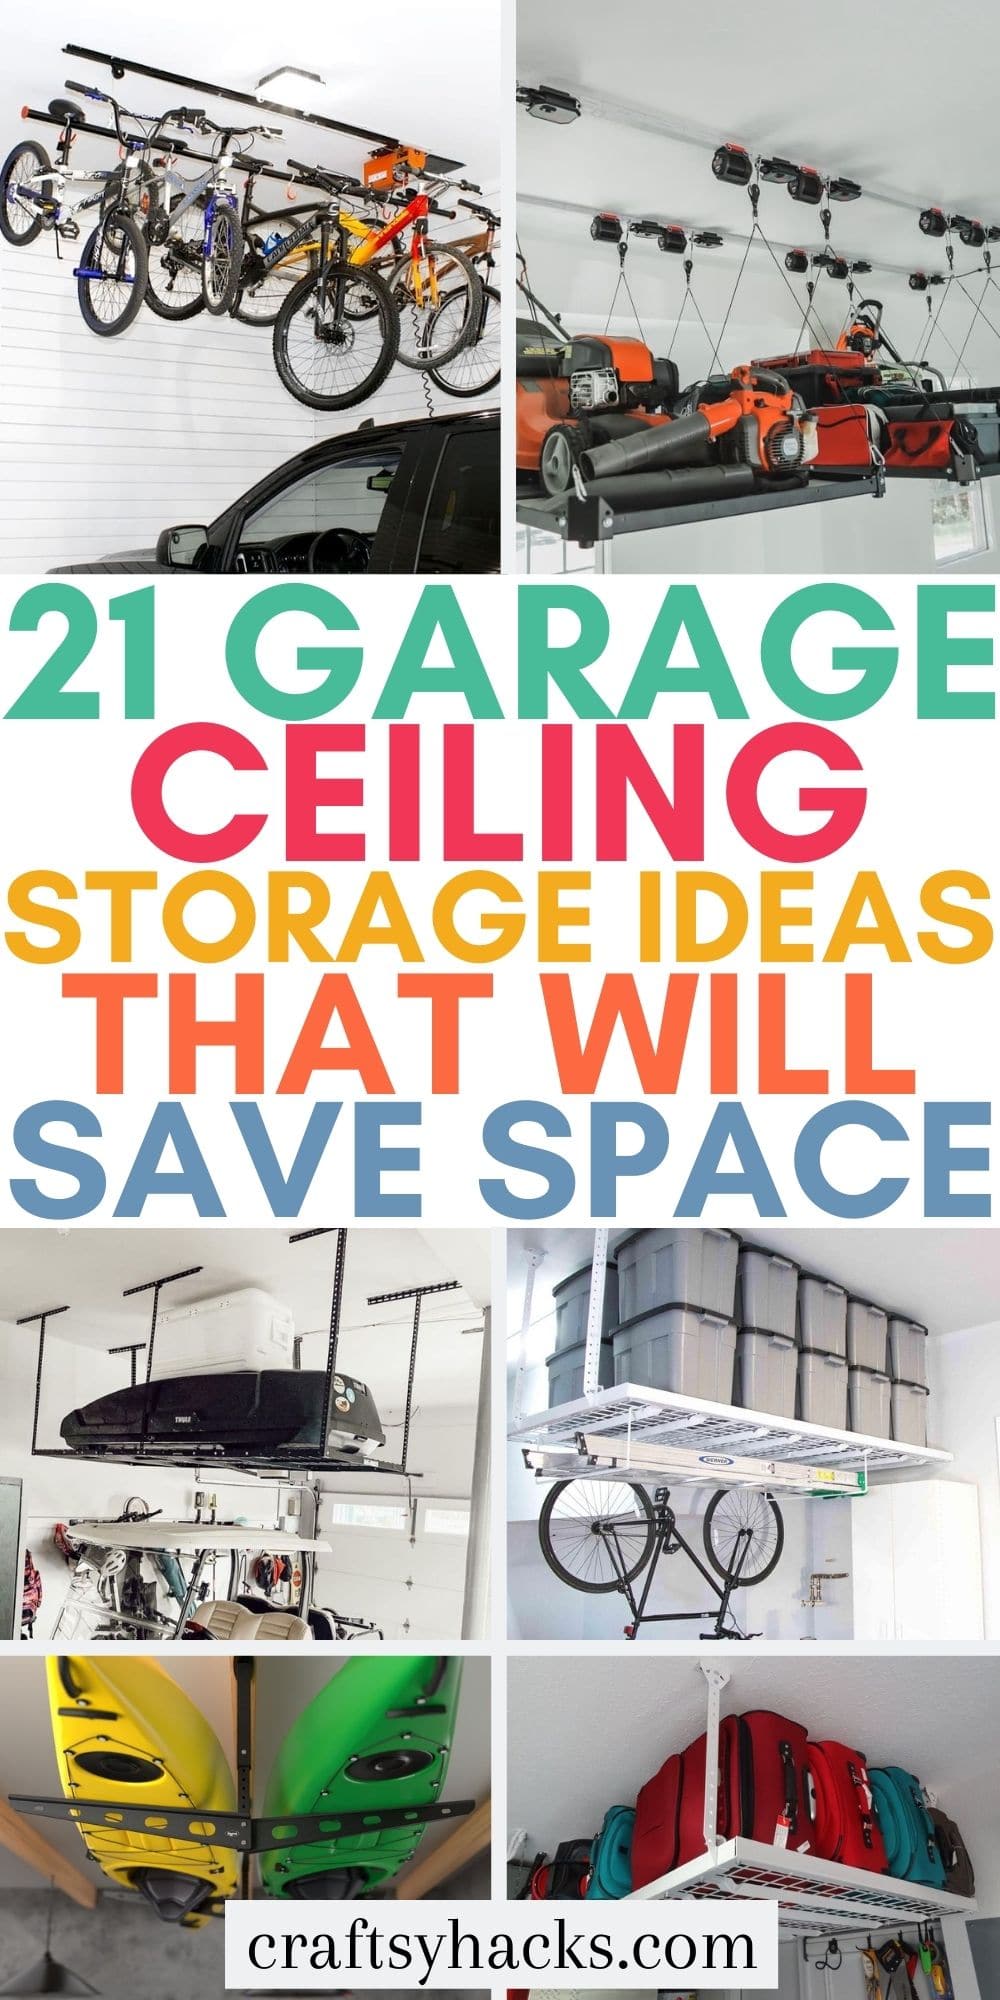 21 Garage Ceiling Storage Ideas to Save You Space ...